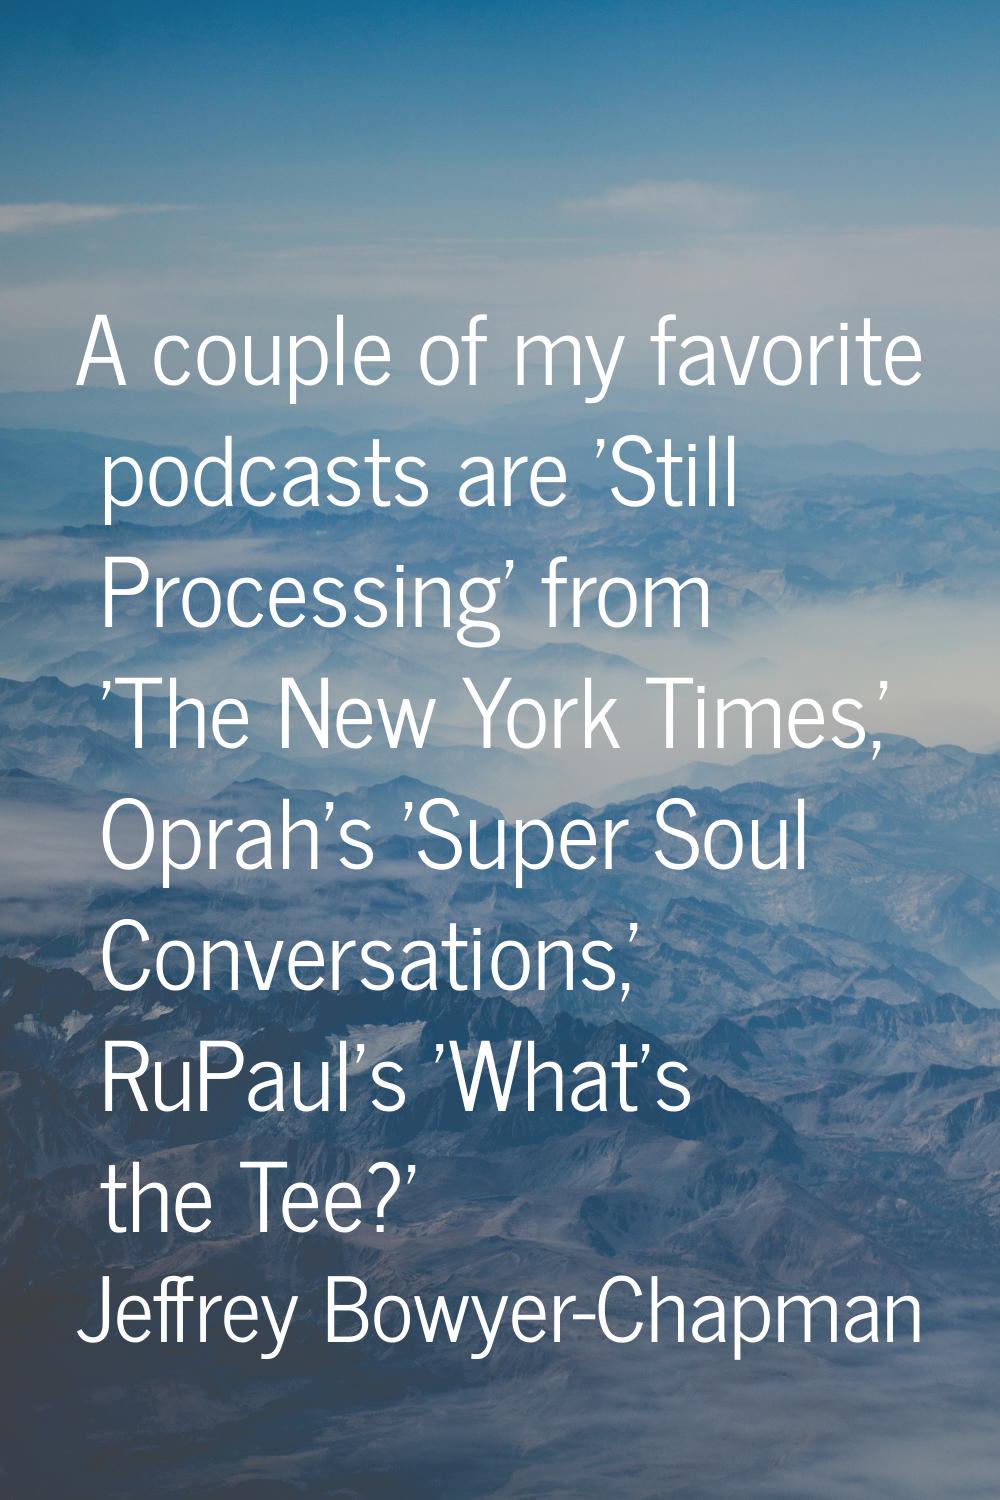 A couple of my favorite podcasts are 'Still Processing' from 'The New York Times,' Oprah's 'Super S